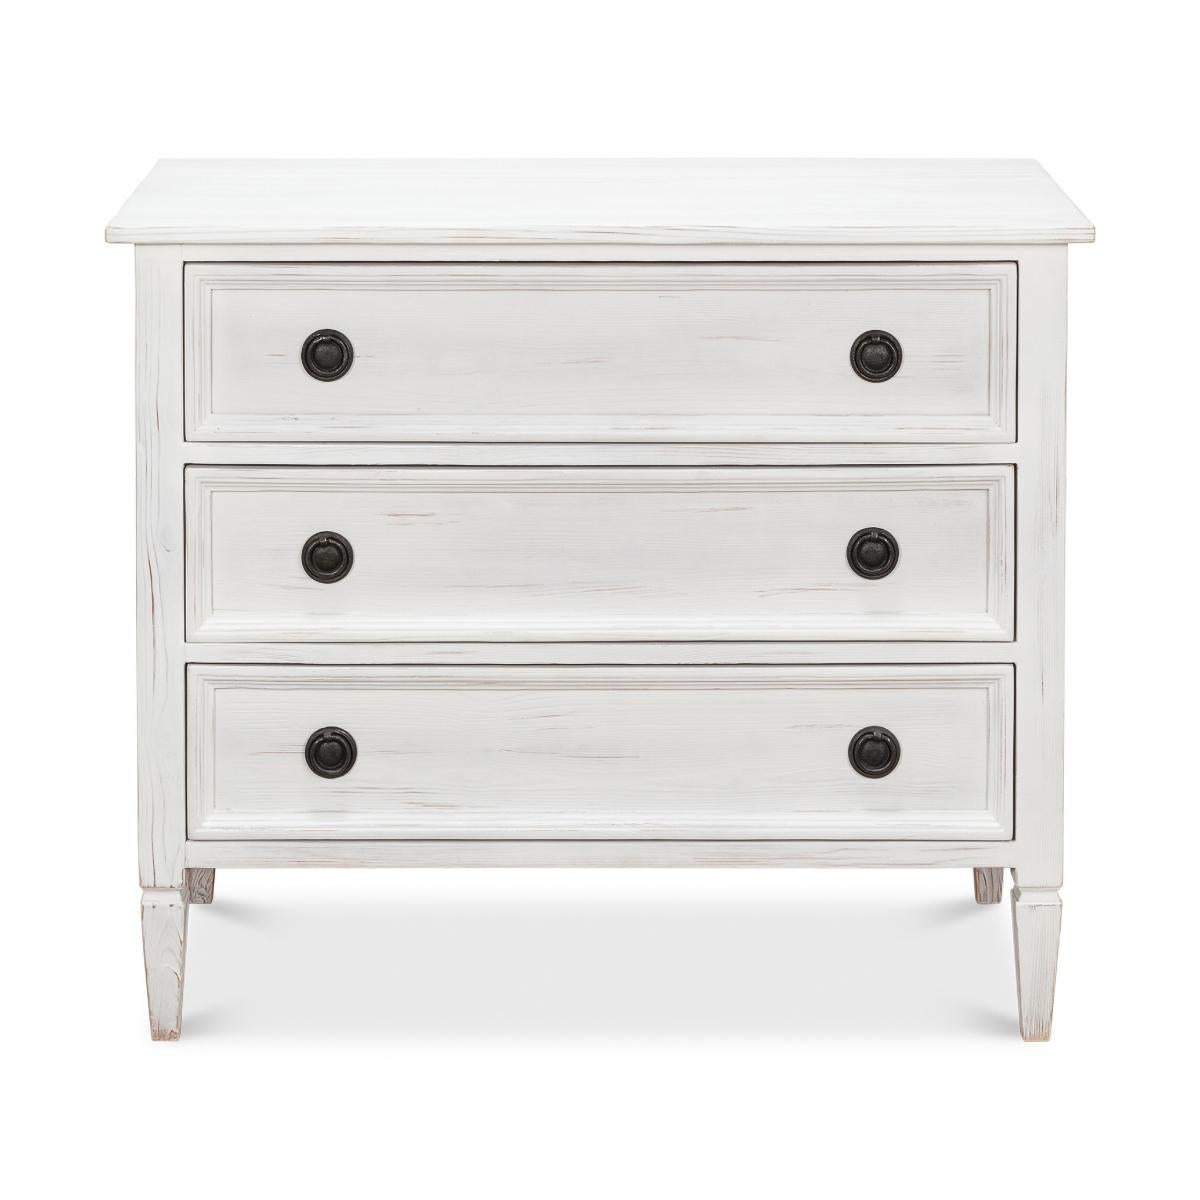 French Provincial White Painted Dresser with a distressed antique finish, with three long drawers and raised square tapered legs.

Dimensions: 38